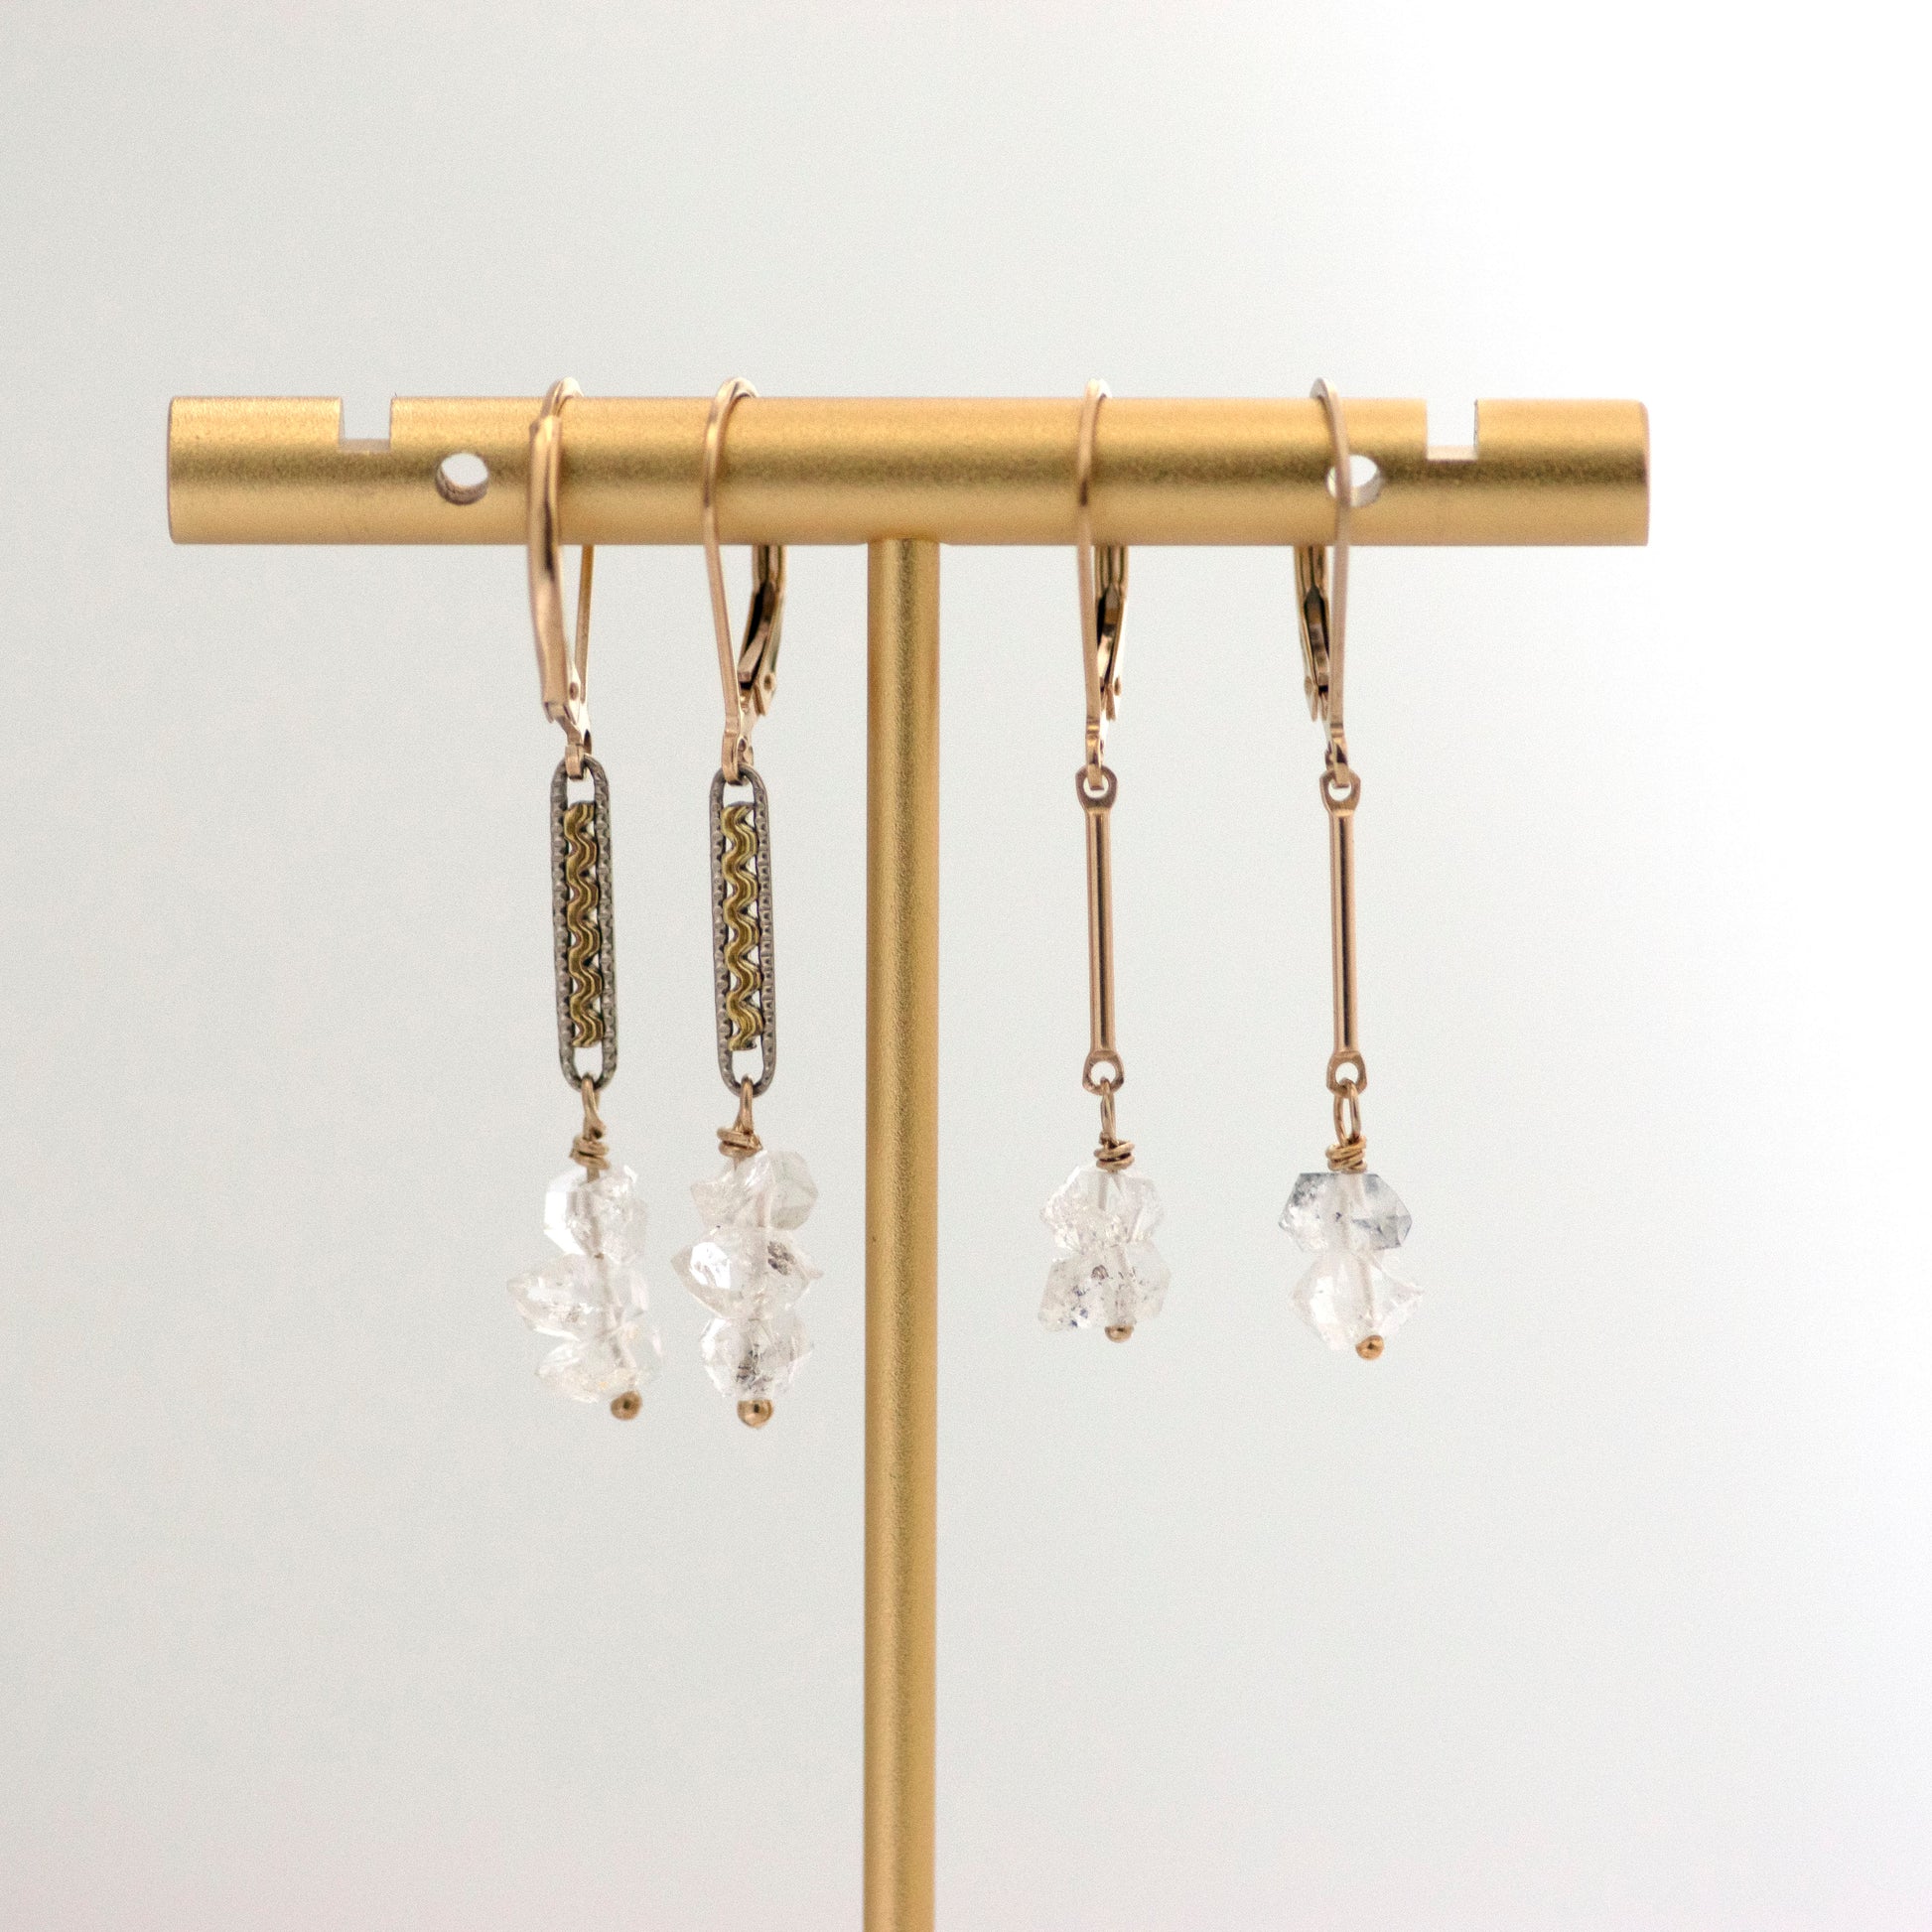 Two pairs of Herkimer diamond earring drops.